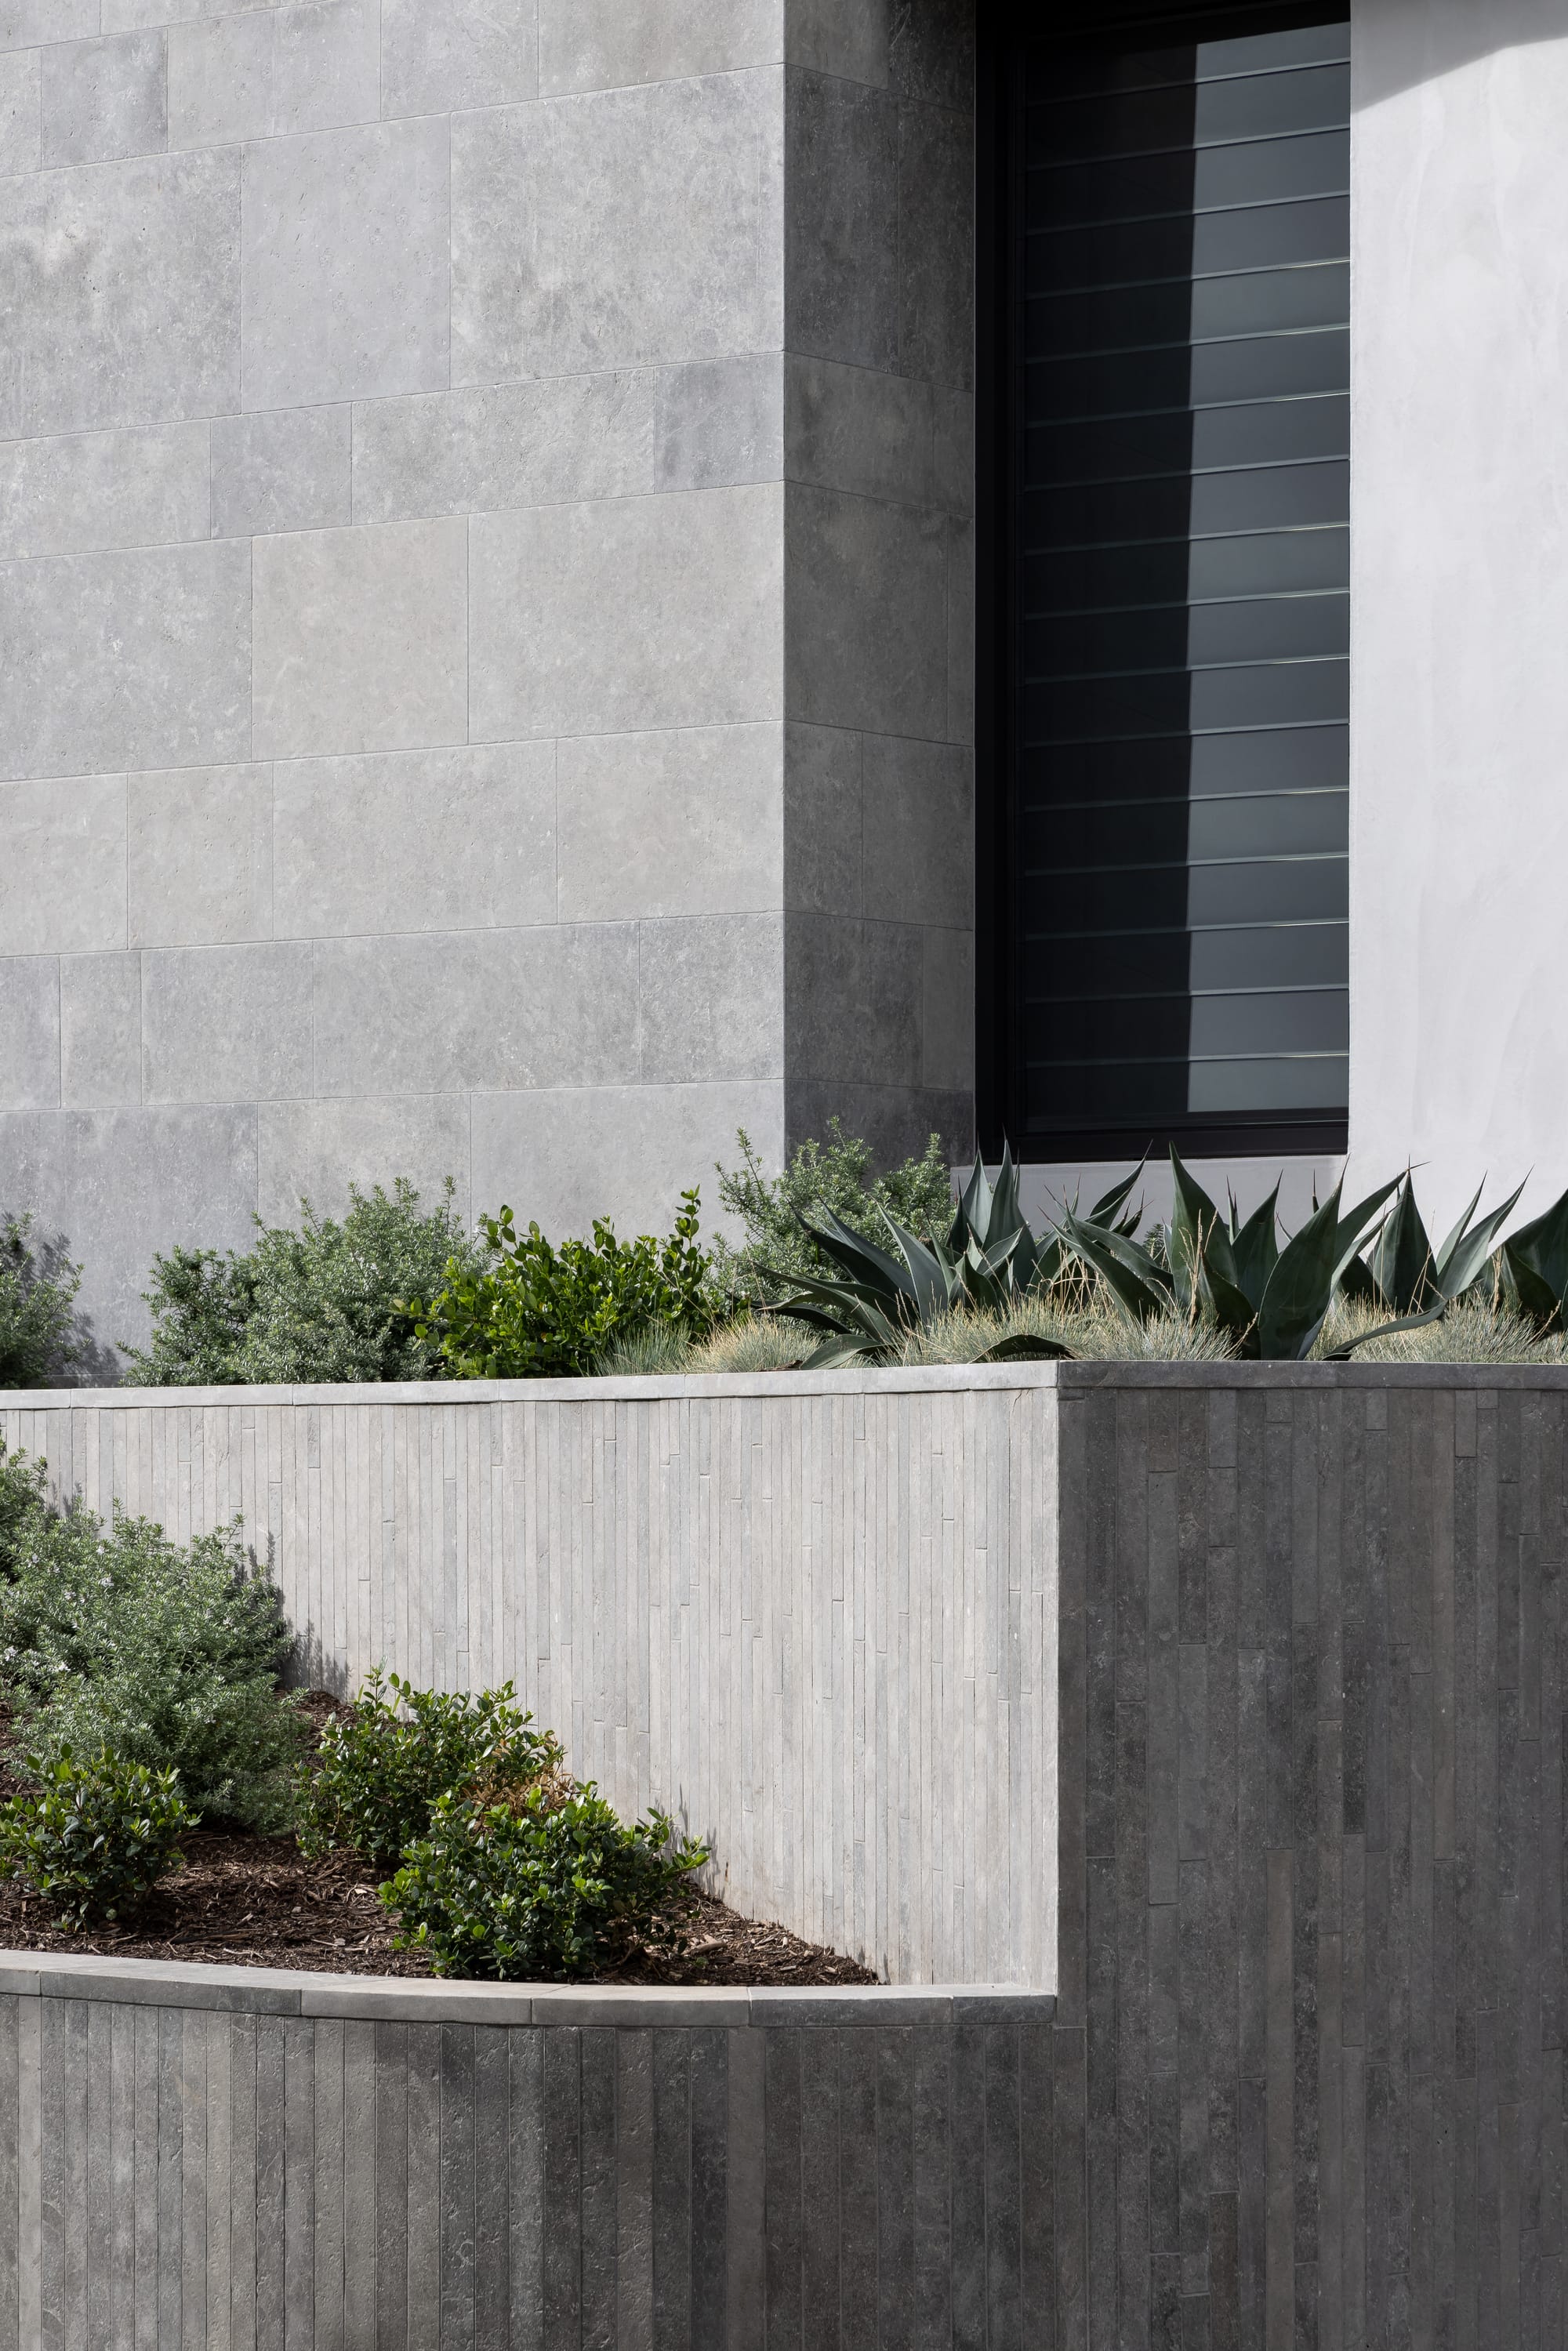 Cliff House by Finnis Architects. Photography by Timothy Kaye. Exterior of home with concrete finish. Integrated tiered garden beds and window with louvres. 